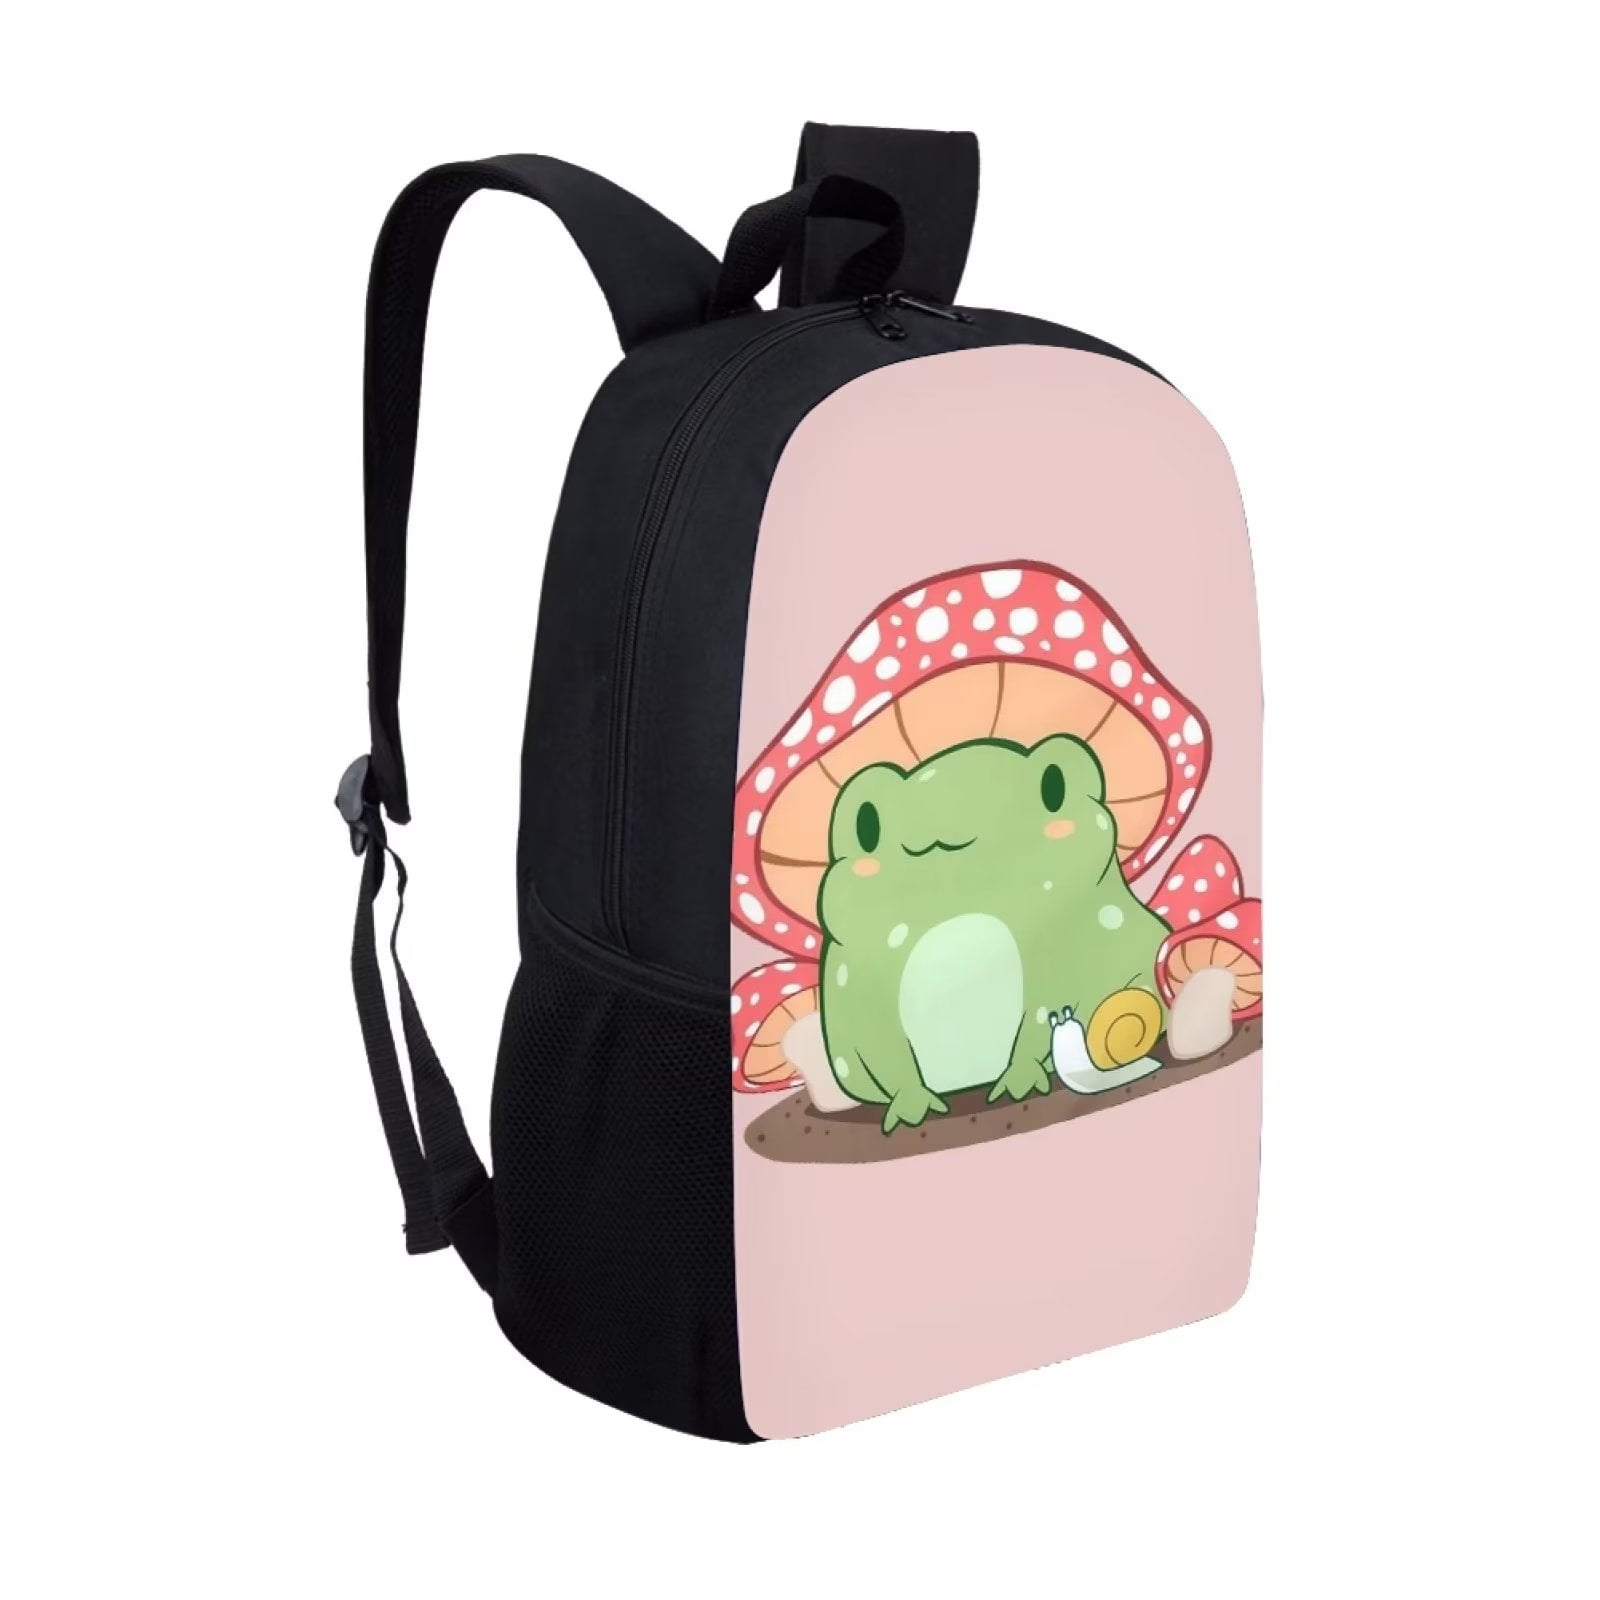 ZOUTAIRONG Mushroom Frog Girls Backpack with Lunch Box Set, Pink Girly  School Bags for Kids Age 6-8/10-12 Elementary Bookbag, Lunch Bag, Pencil  Case